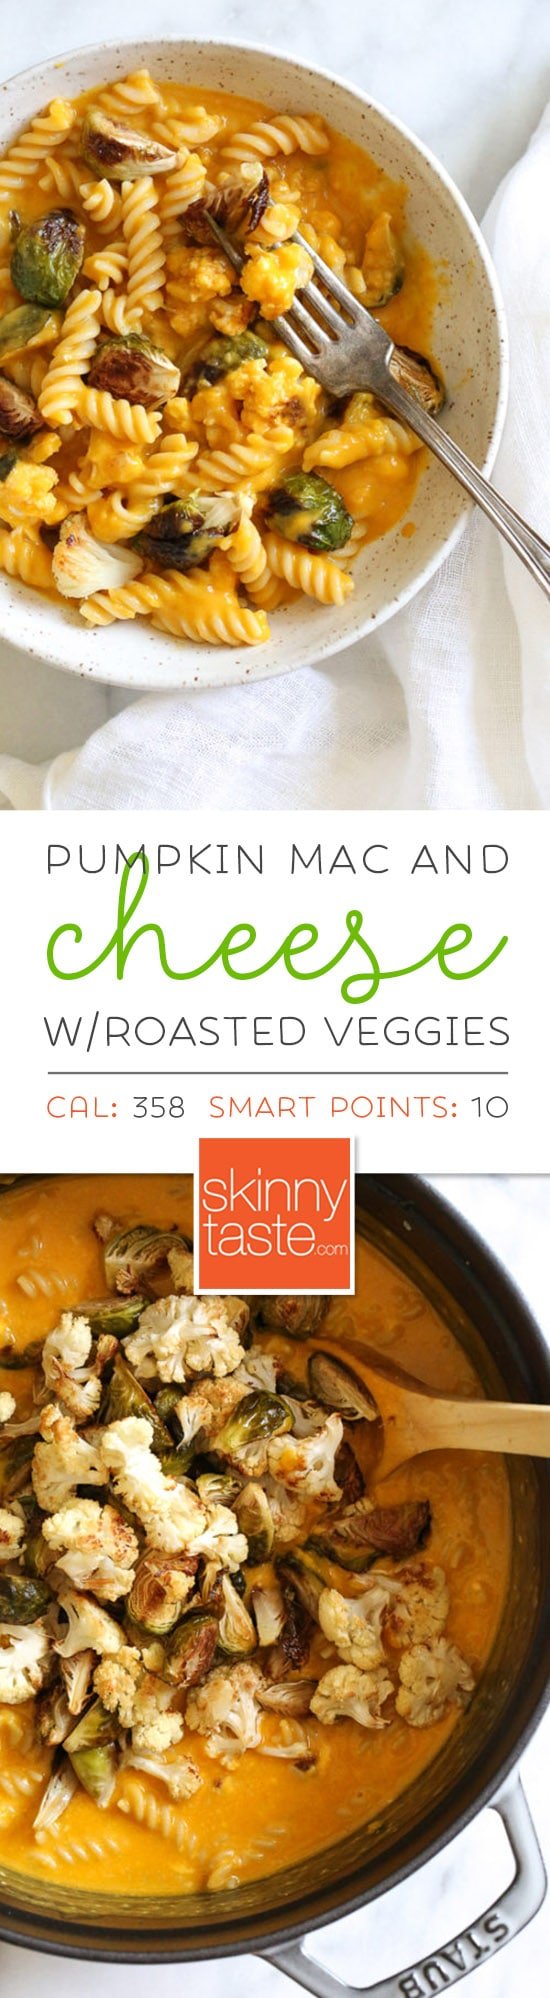 Pumpkin Mac and Cheese with Roasted Cauliflower and Brussels Sprouts is a must for the Fall! Using pumpkin puree makes a creamy light cheese sauce, without having to add cream or too much cheese. You can make your own pumpkin puree or use organic canned pumpkin to make it faster! #pumpkin #macandcheese #glutenfree #recipe #pasta #easydinner #vegetarian #weightwatcherrecipes